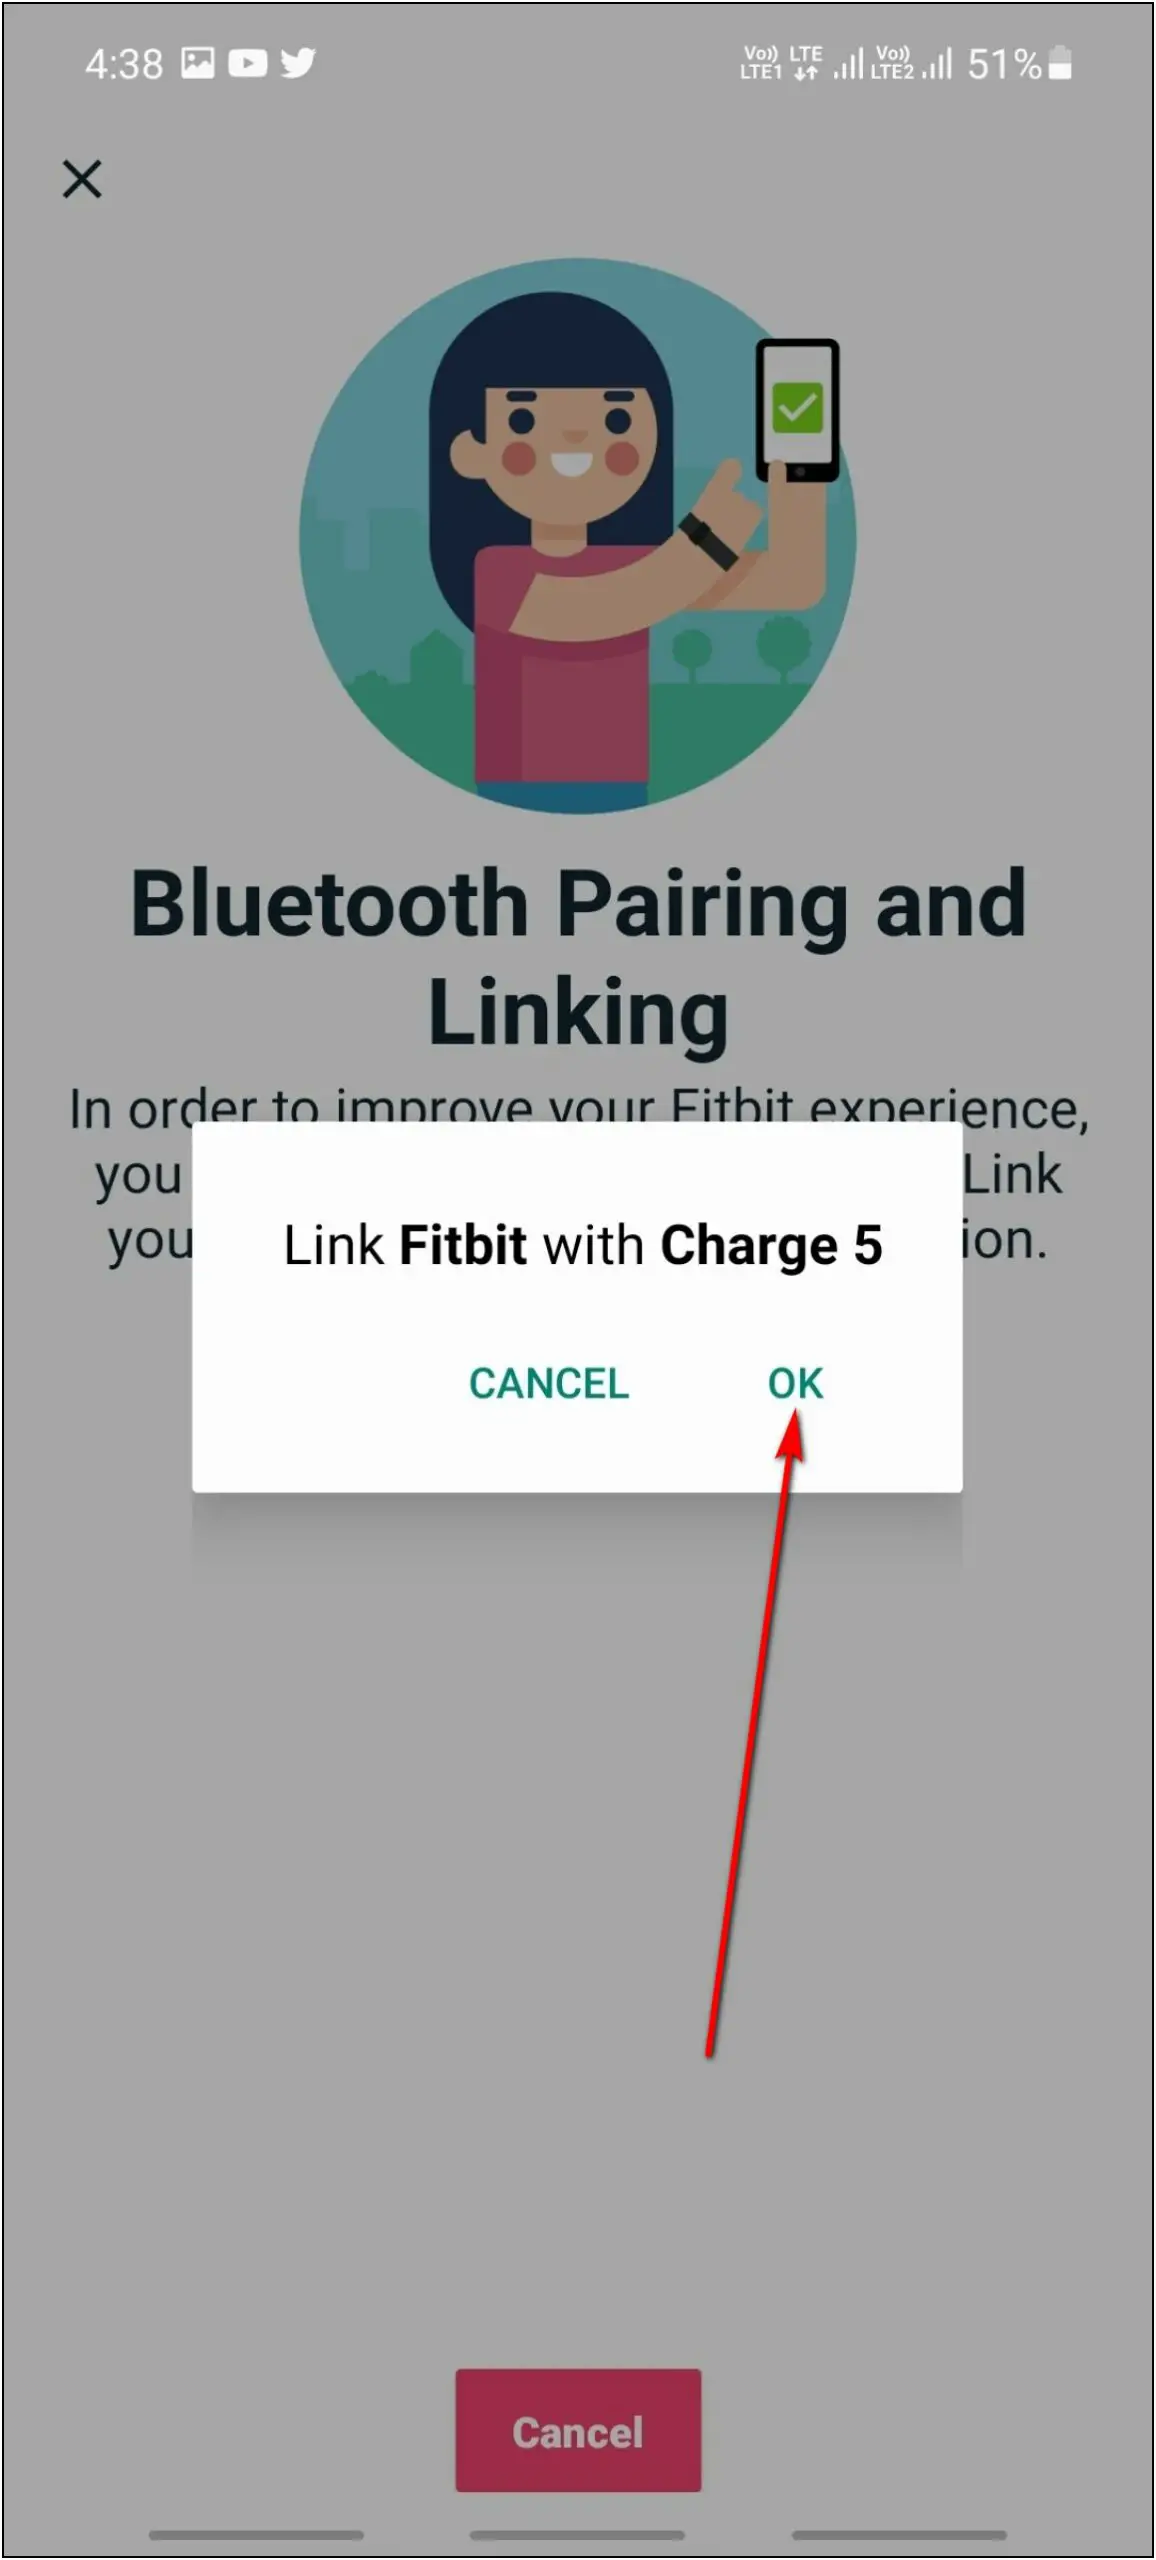 Connect Setup Fitbit Charge 5 Android